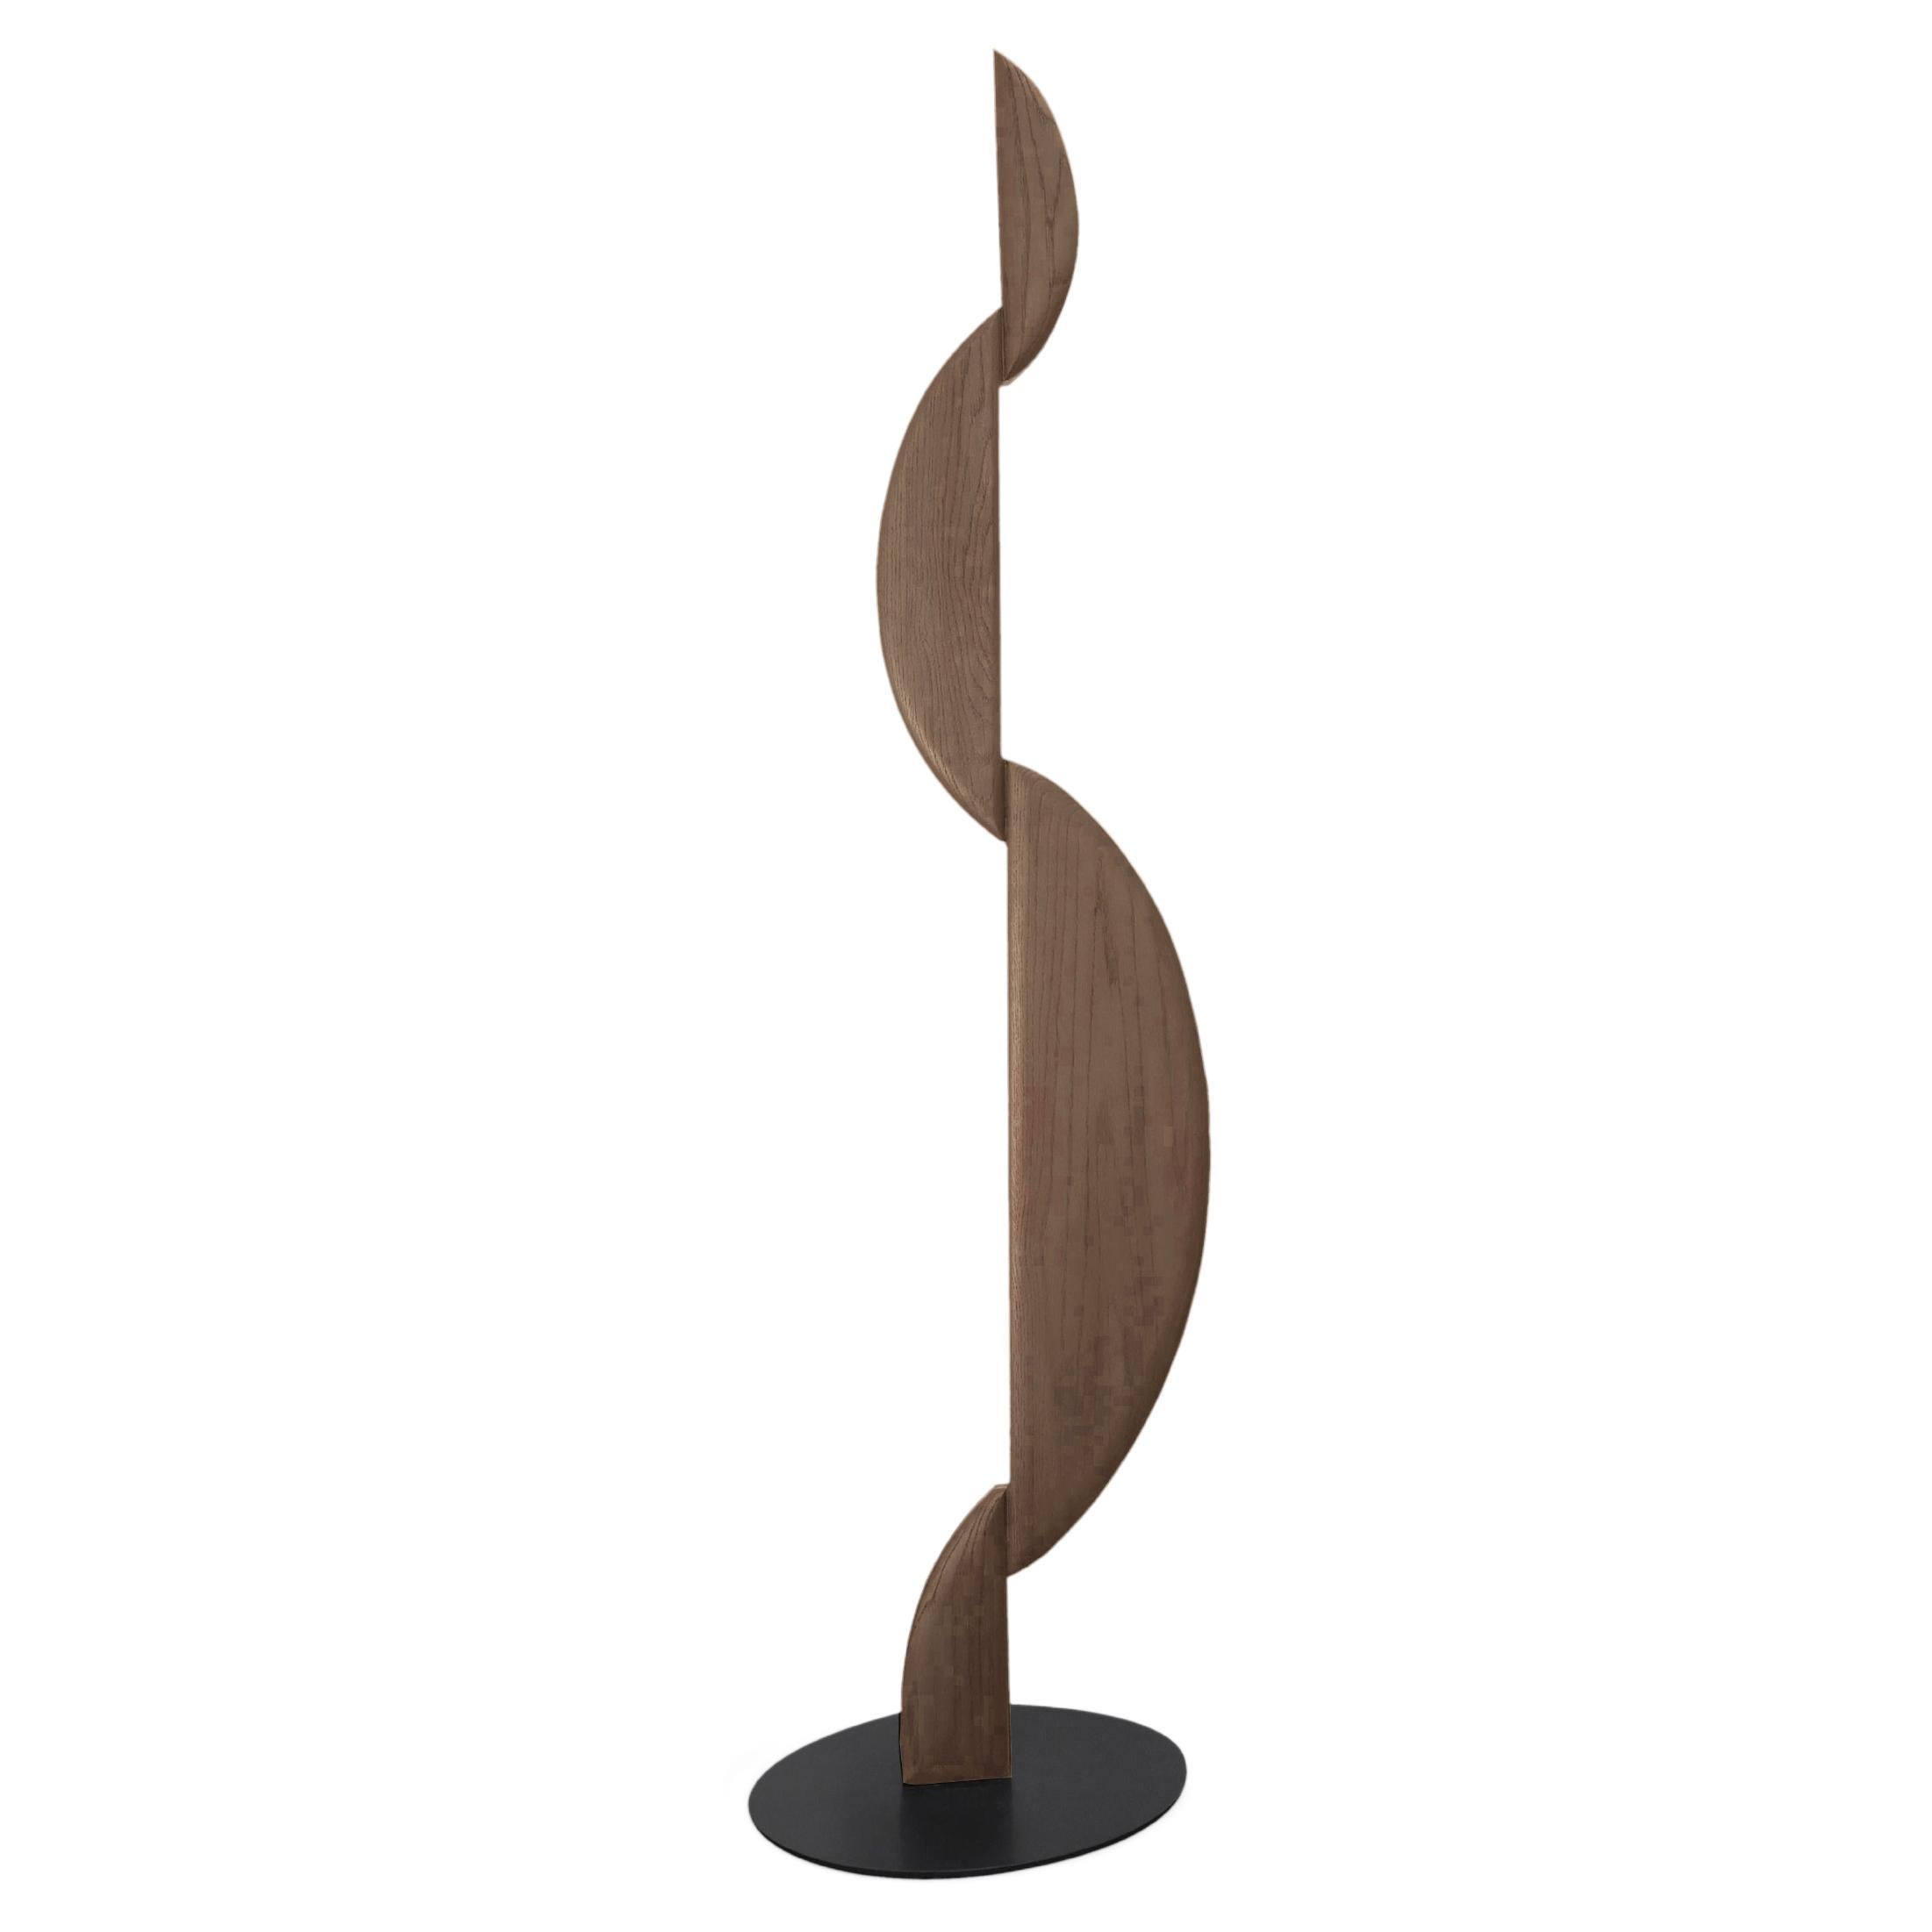 Noviembre I Standing Sculpture Inspired in Brancusi in Solid Walnut Wood by Joel For Sale